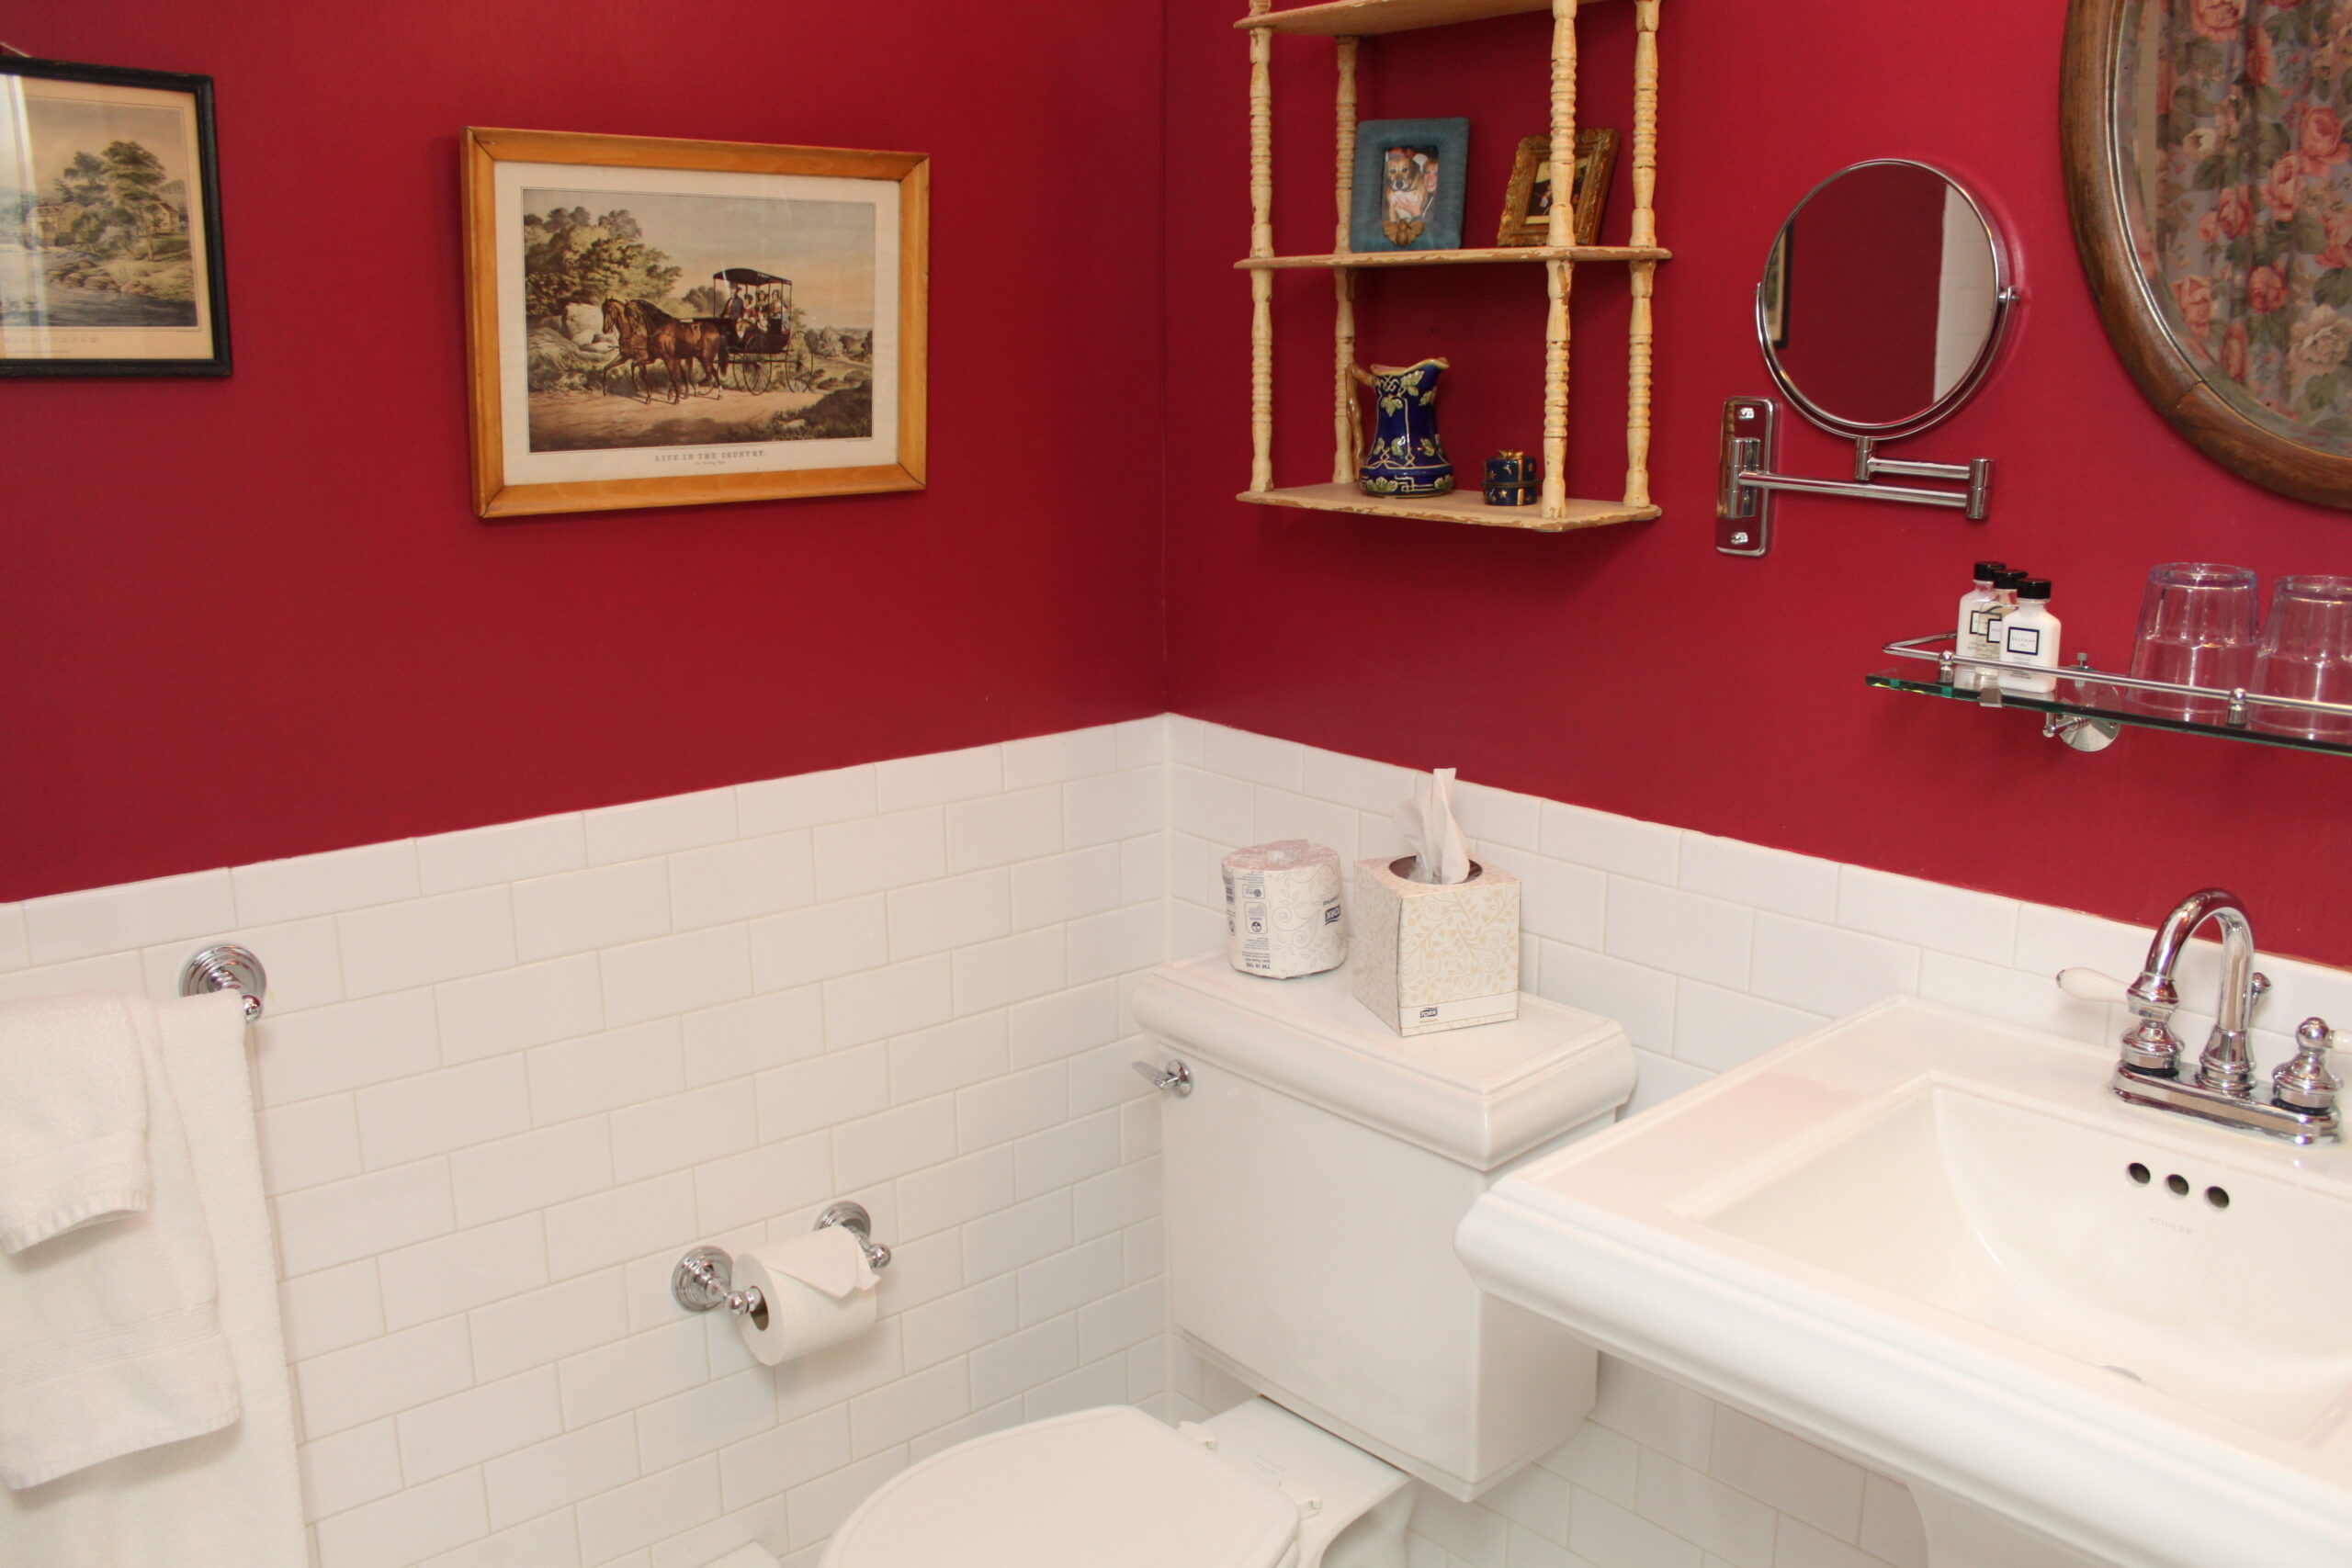 bathroom sink and wall decorations